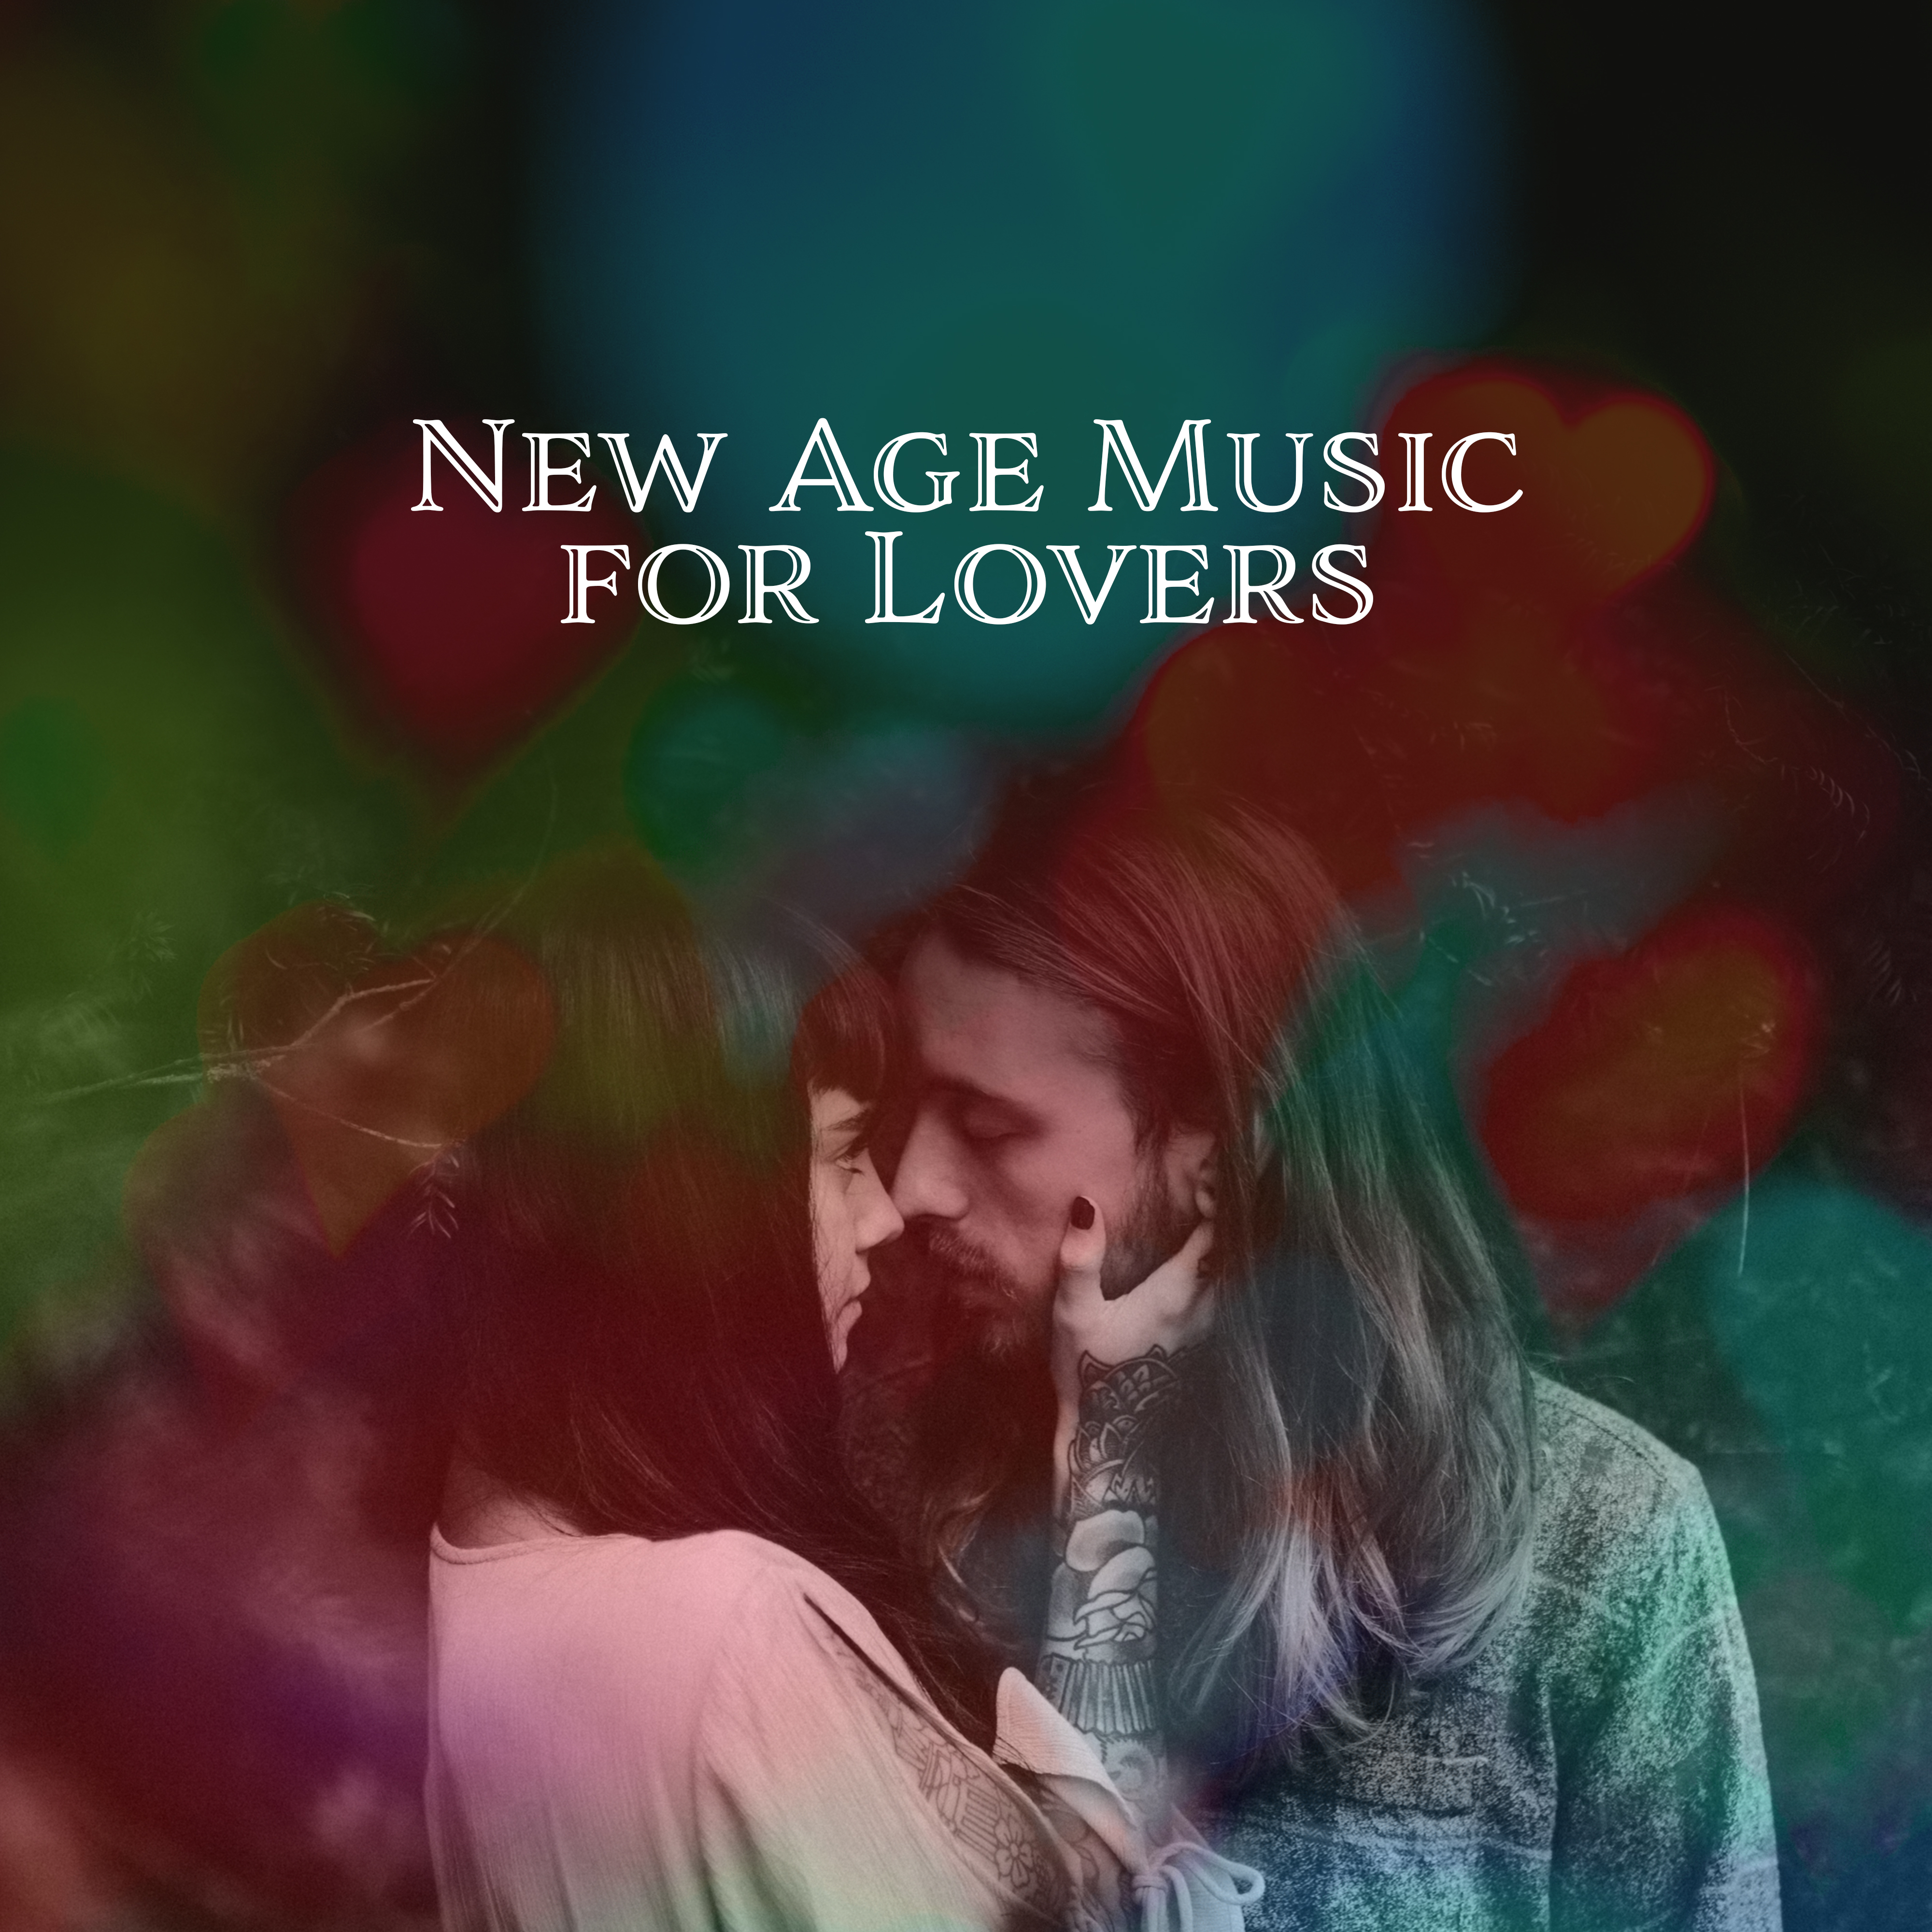 New Age Music for Lovers – Romantic Music, Sensual Dance, Deep Massage, Tantric Sex, Peaceful Music at Night